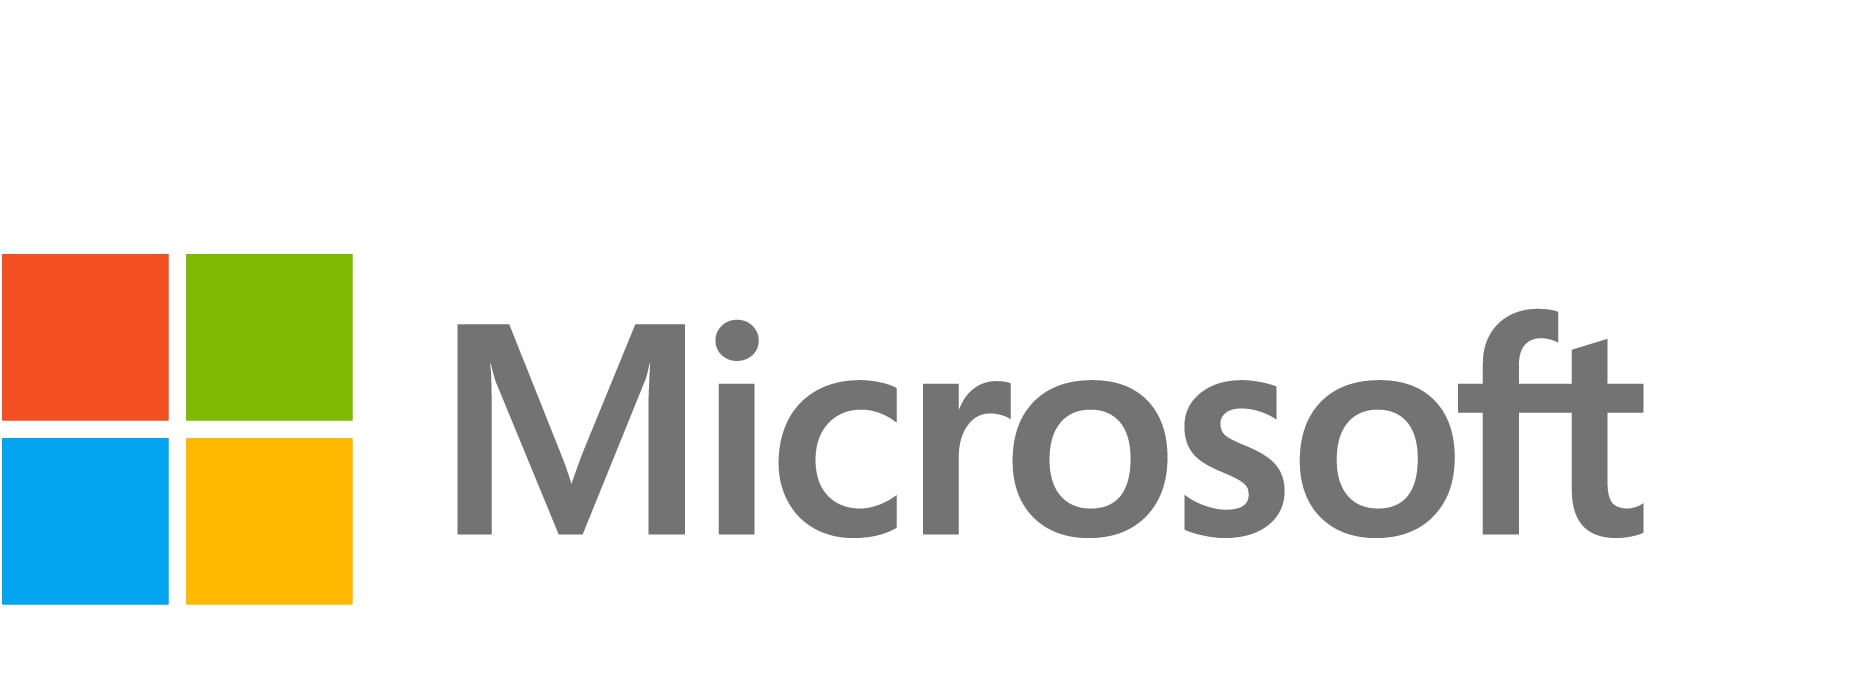 Microsoft Complete for Business with Accidental Damage from Handling - extended service agreement - 3 years - shipment